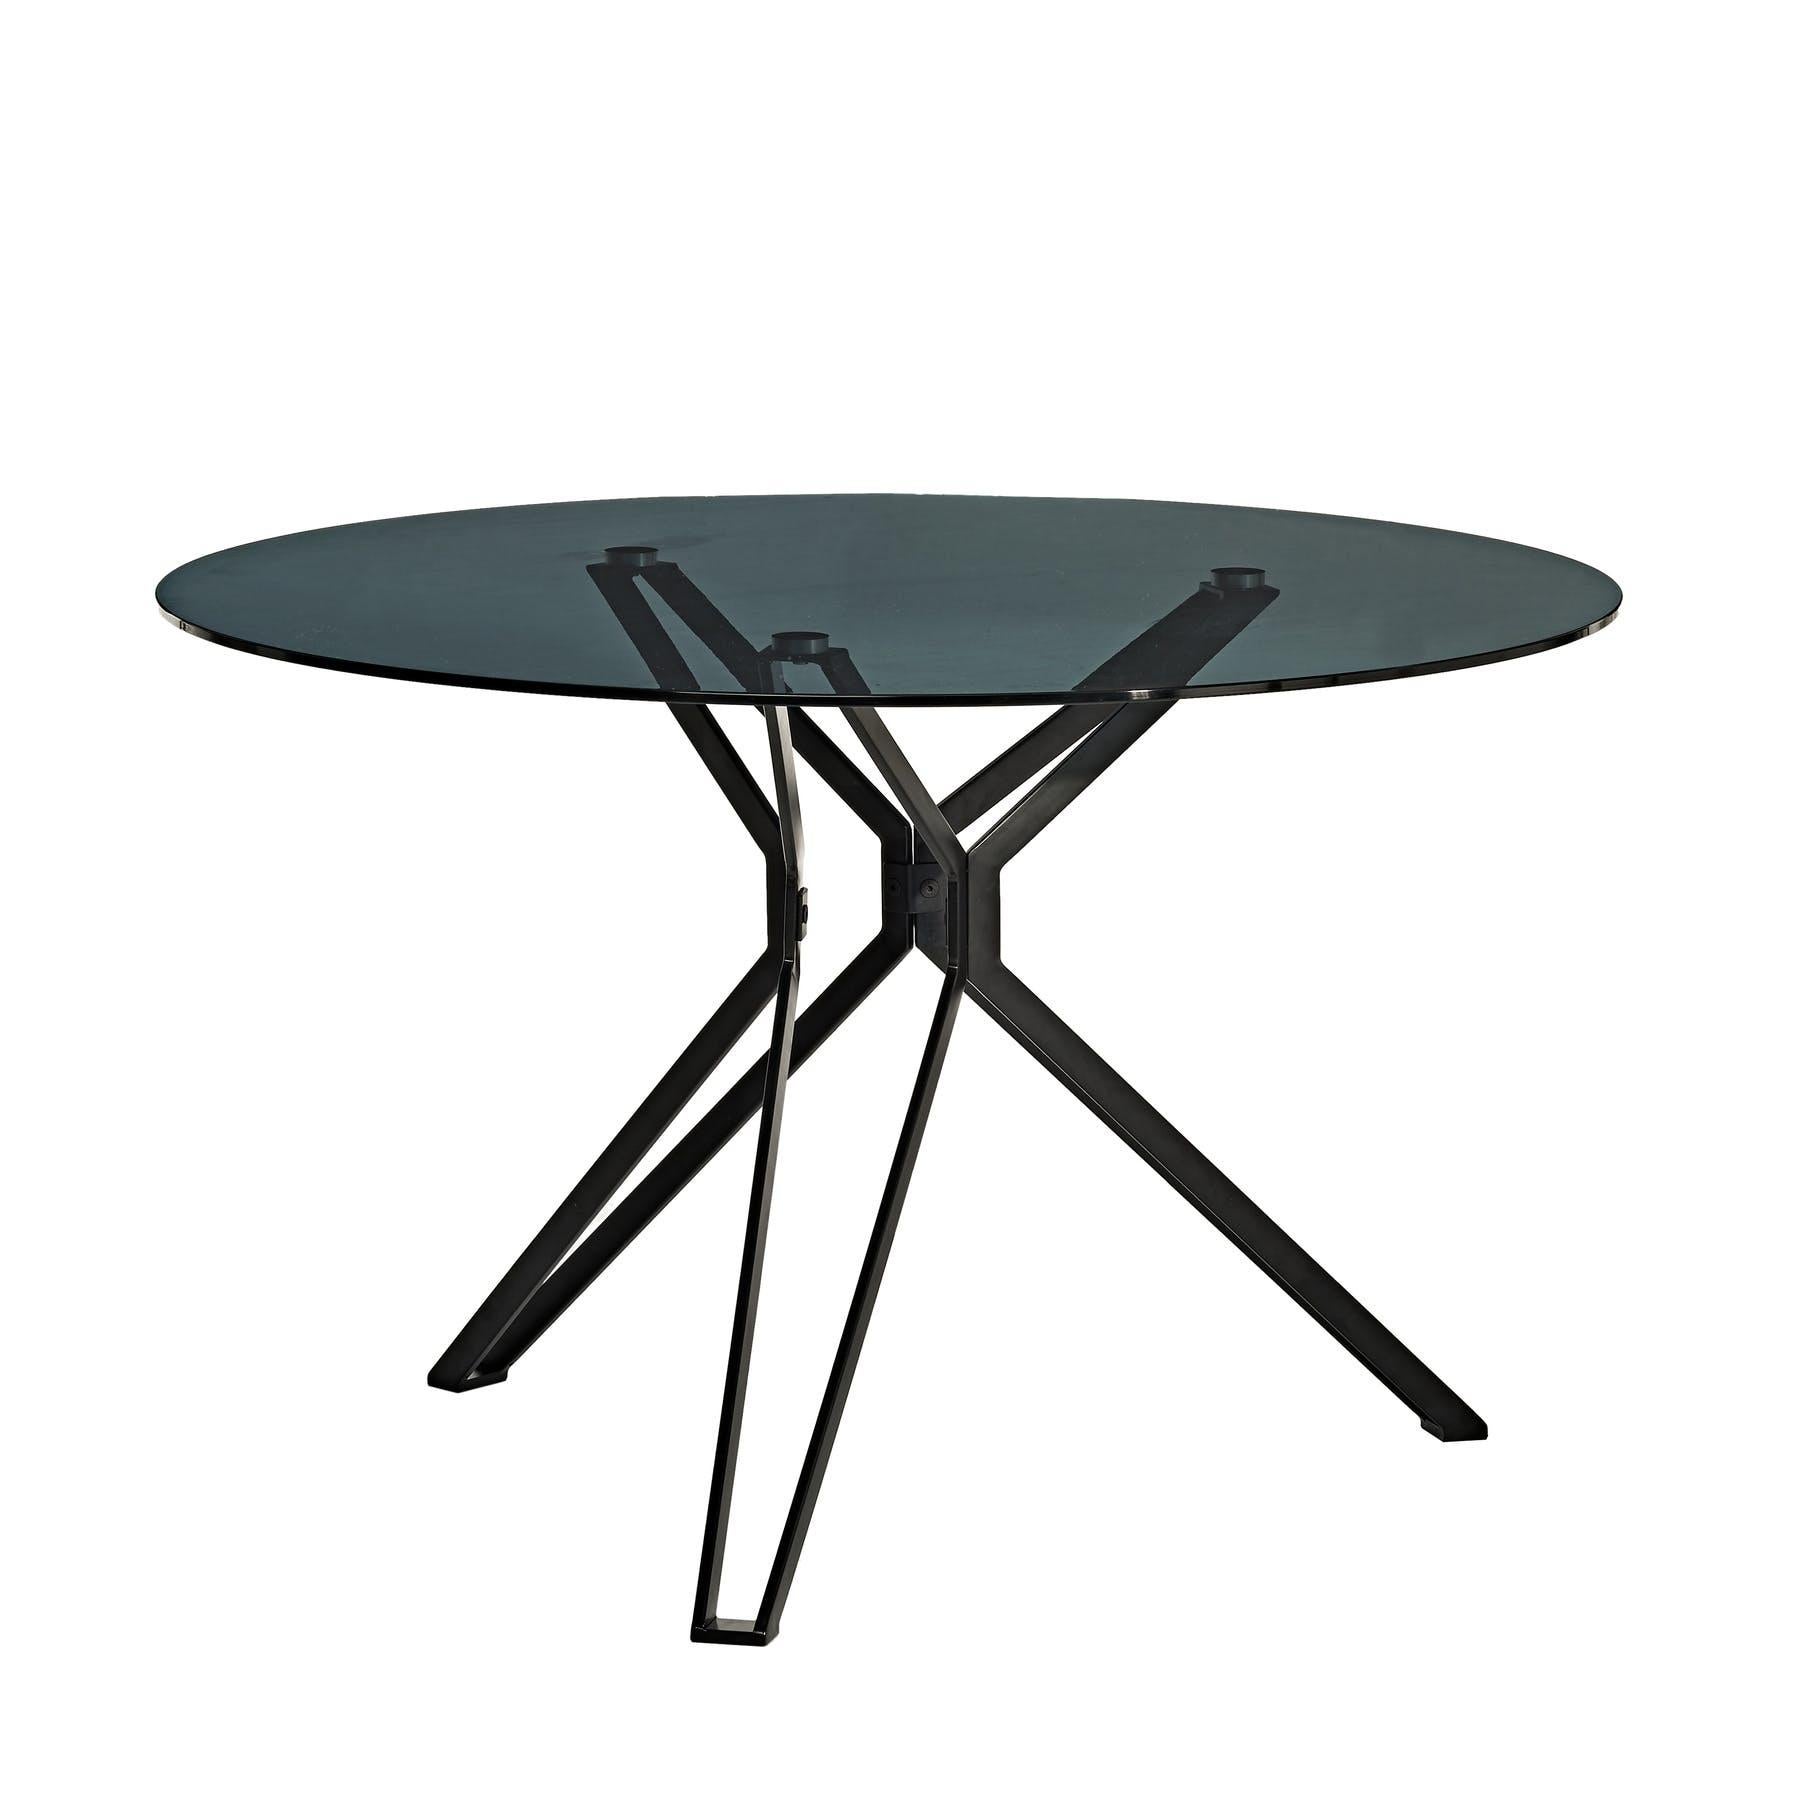 Laminated Modern Glass Round Table, Pols Potten Studio For Sale